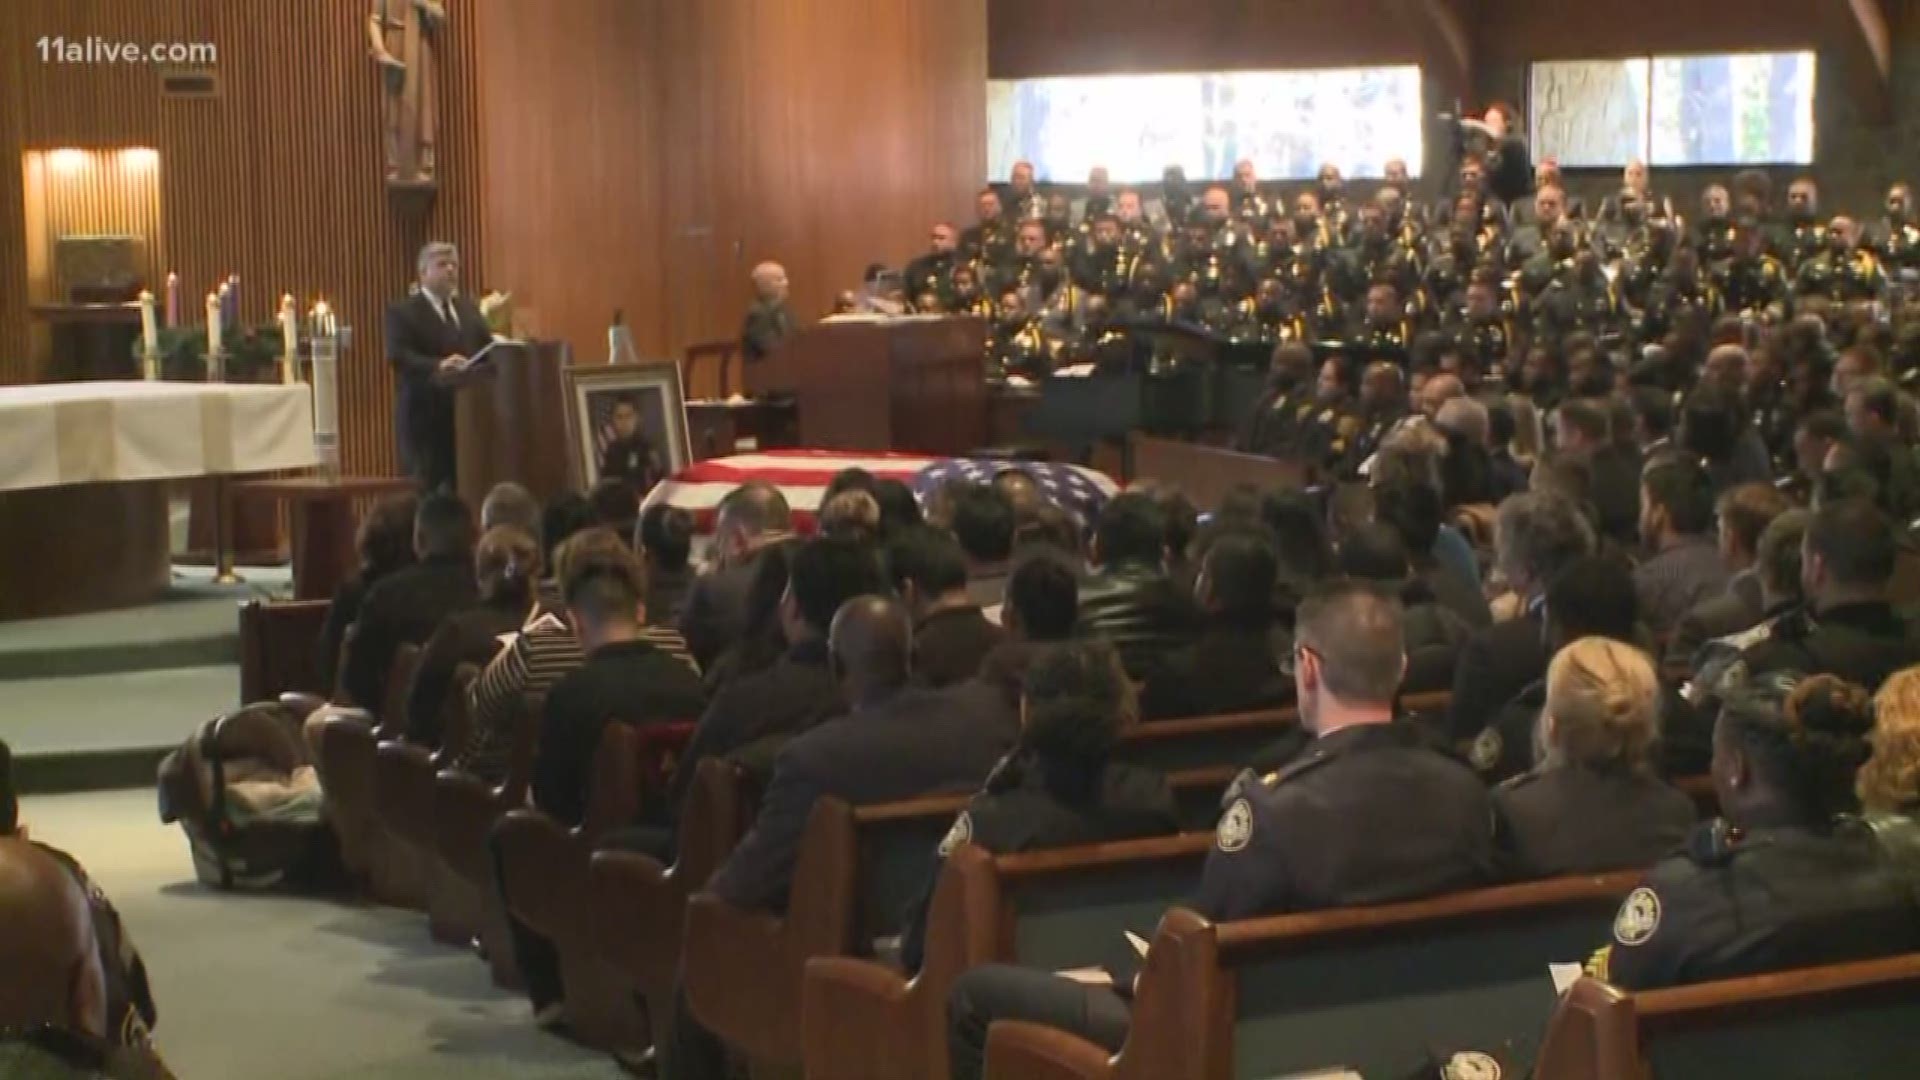 Law enforcement officers attend the funeral of Officer Edgar Flores.